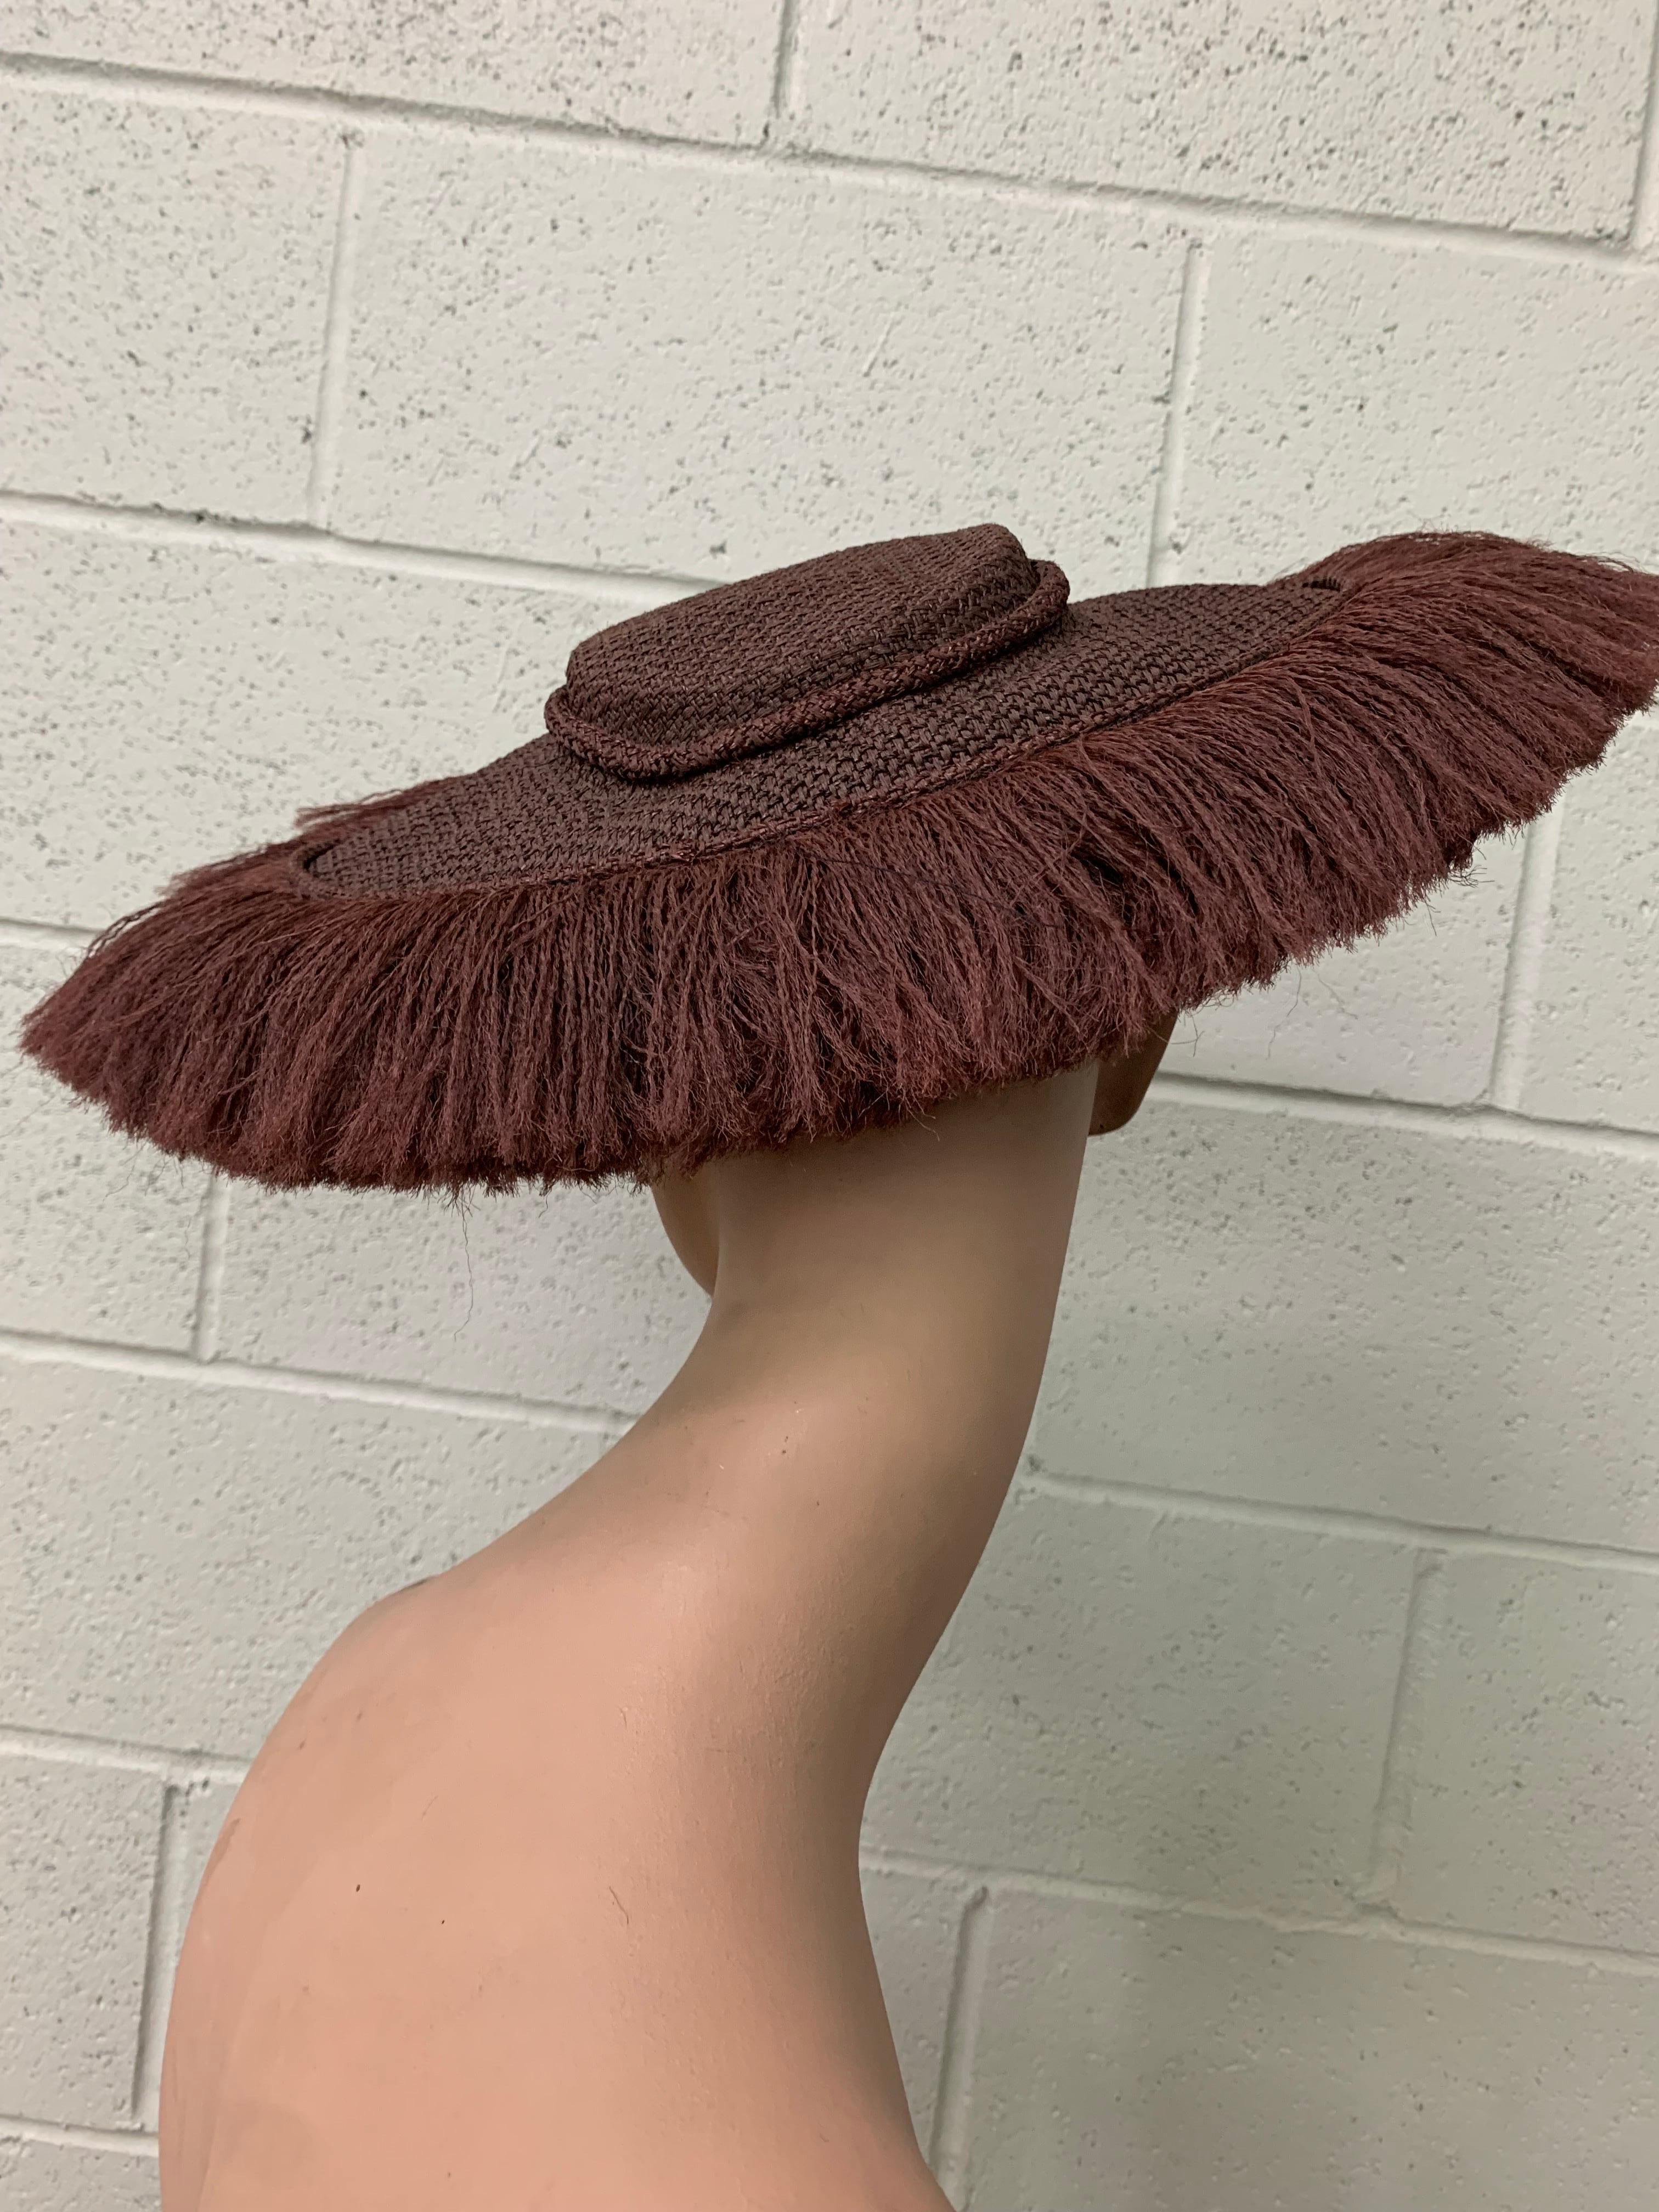 1940s Shenley's Cocoa Brown Rayon Woven & Fringed Saucer Hat w Low Crown For Sale 3